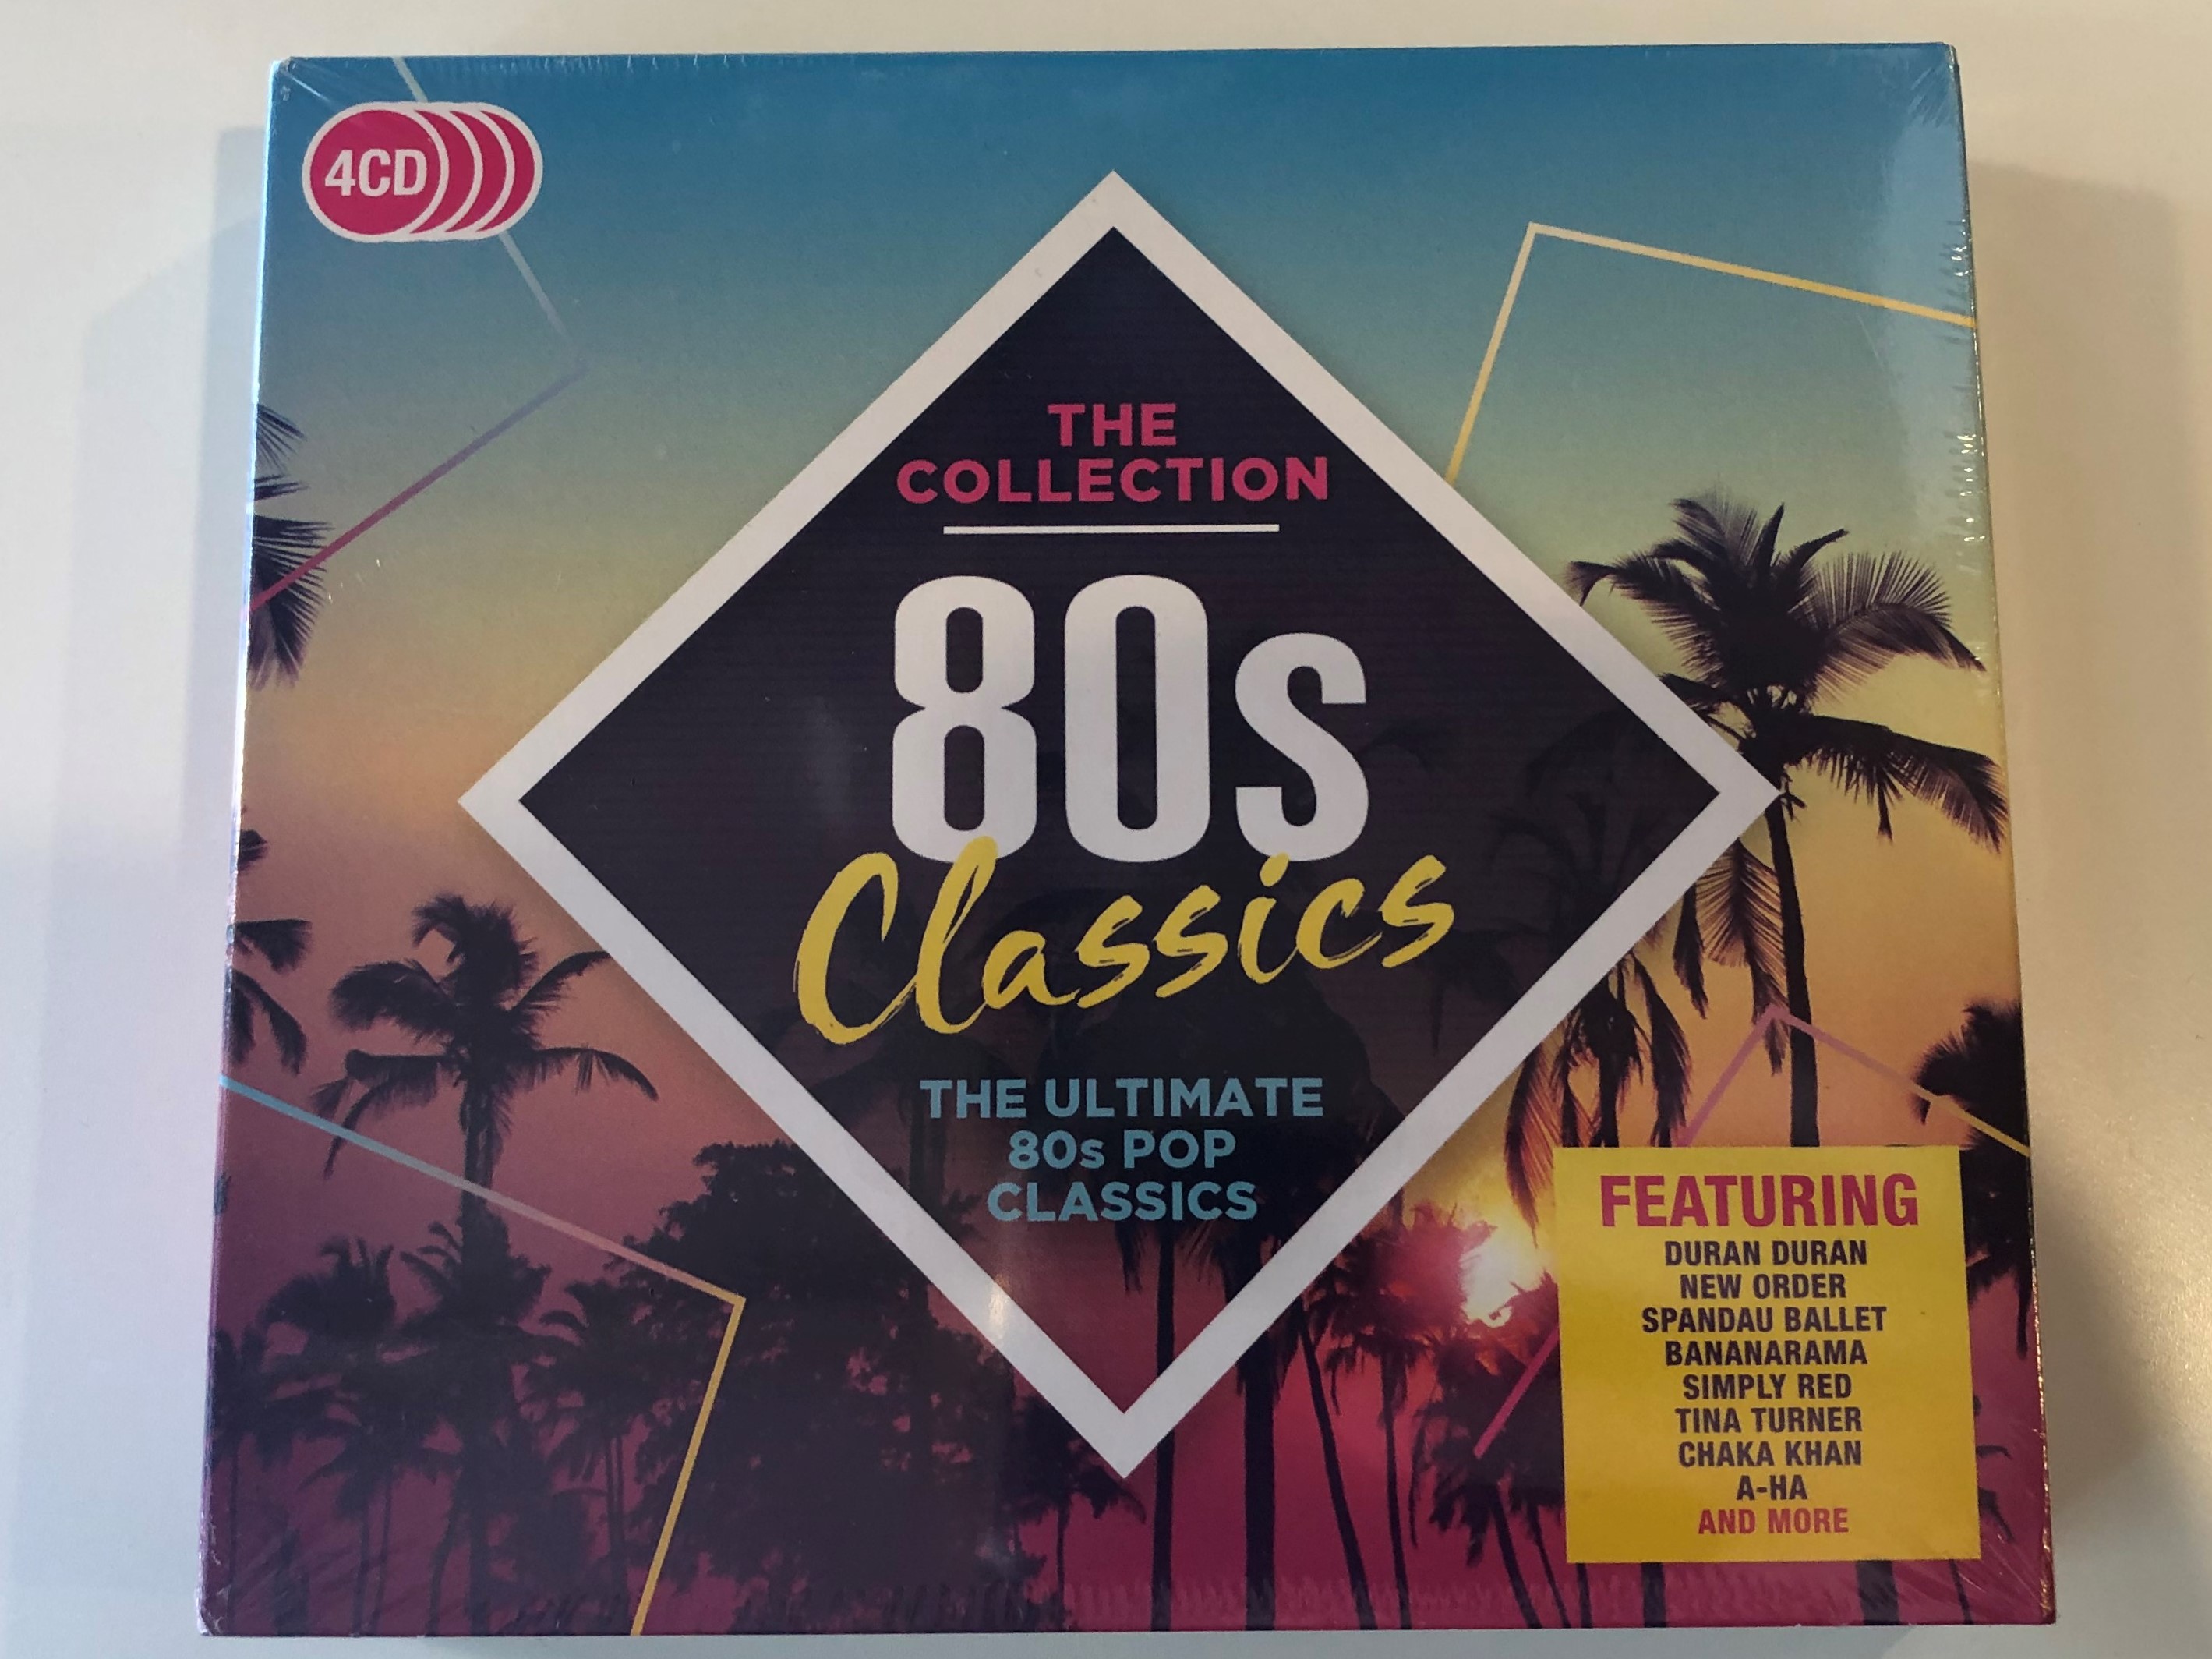 the-collection-80s-classics-the-ultimate-80s-pop-classics-featuring-duran-duran-new-order-spandau-ballet-bananarama-simply-red-tina-turner-chaka-khan-a-ha-and-more-rhino-records-4x-a-1-.jpg